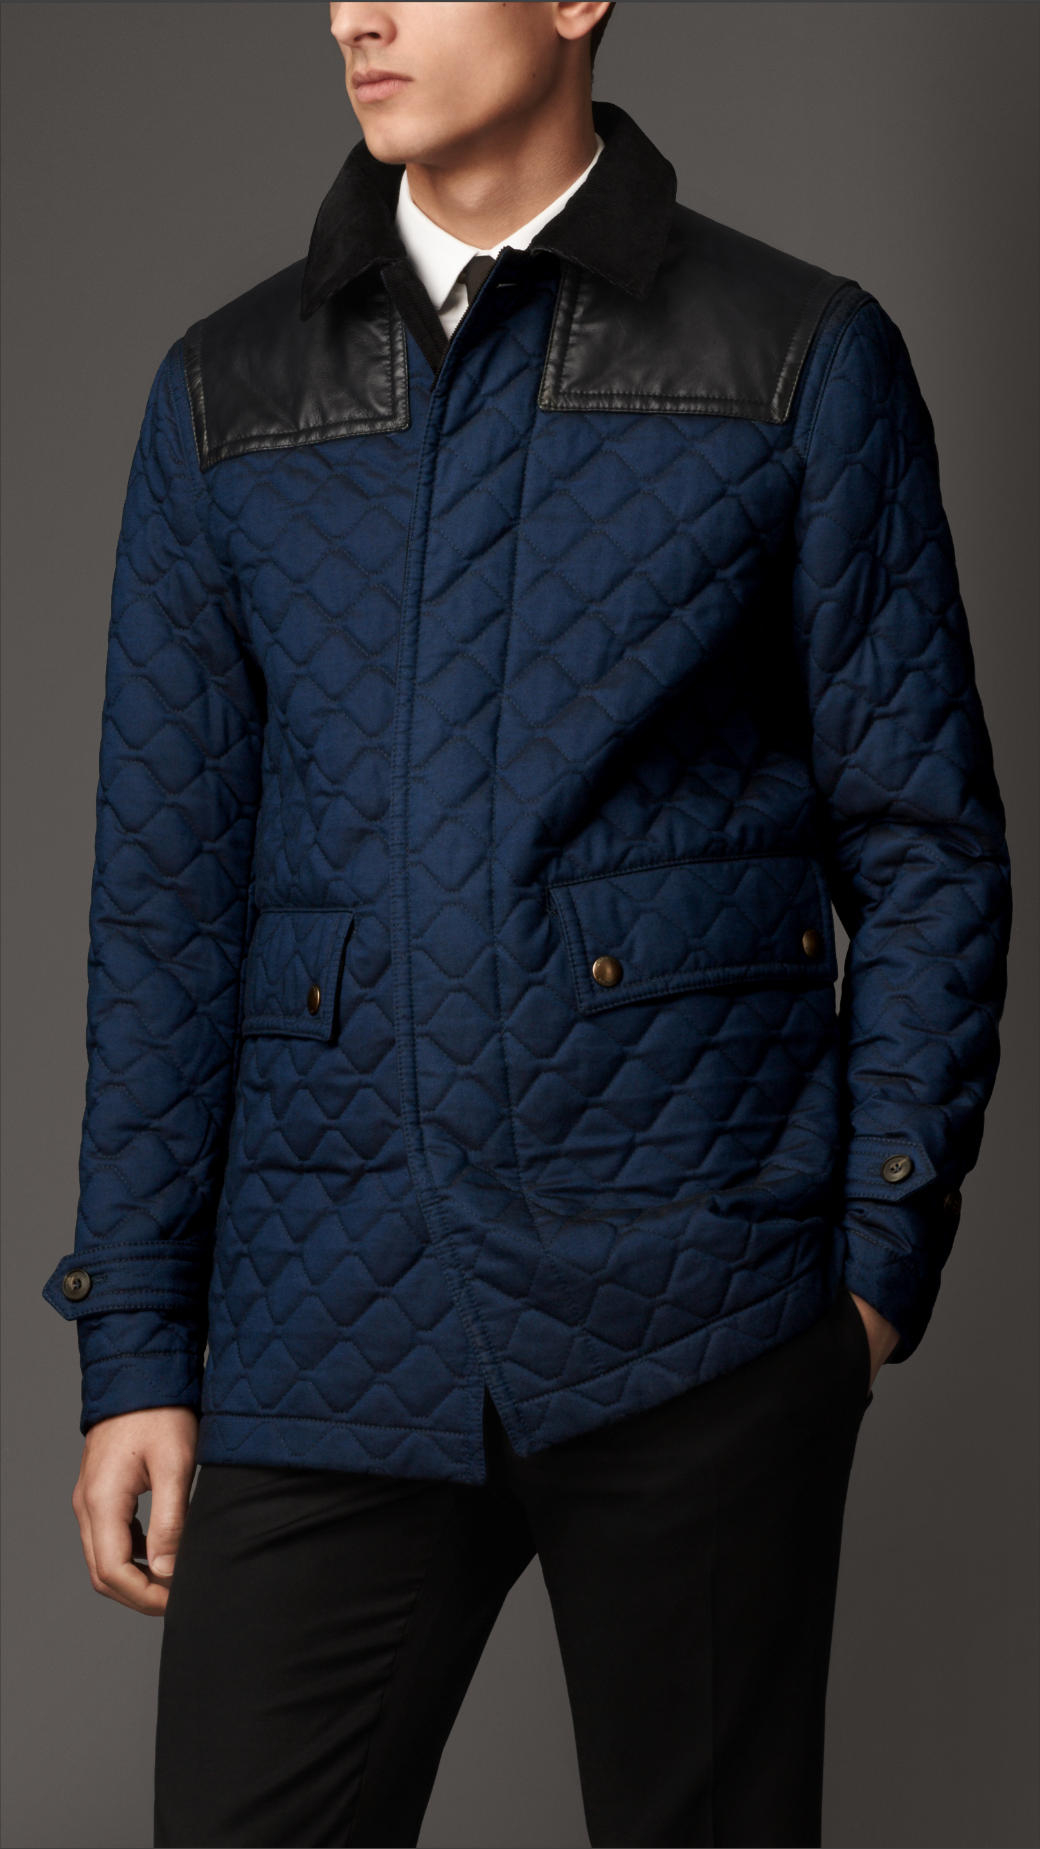 Burberry Leather Trim Quilted Donkey Jacket in Blue for Men - Lyst